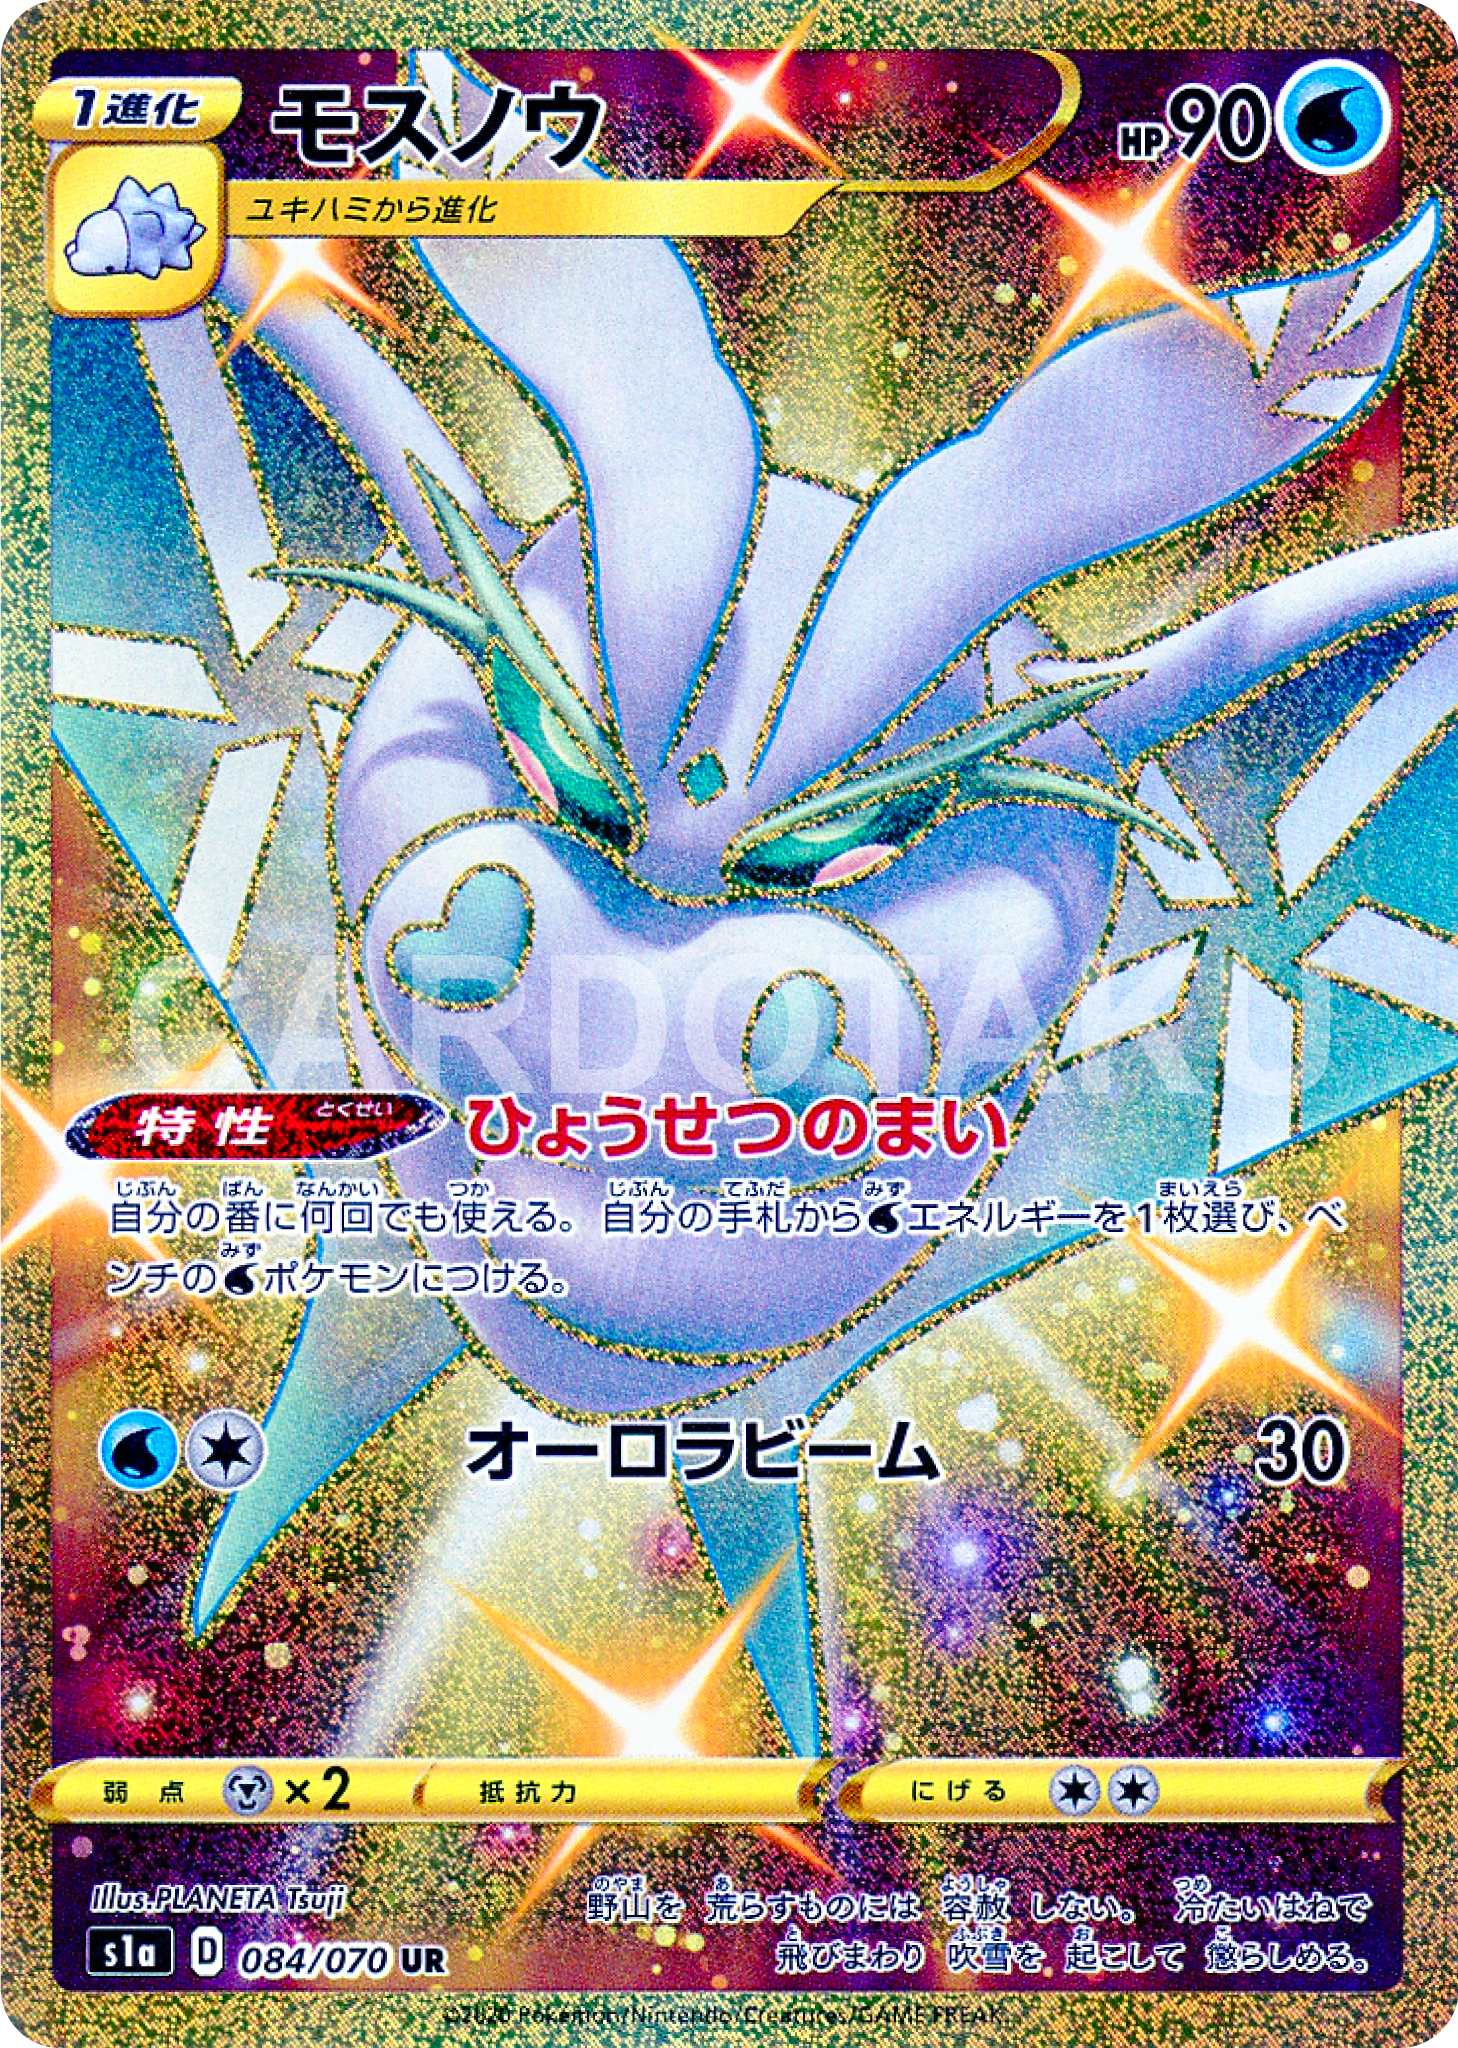 POKÉMON CARD GAME Sword & Shield Expansion pack ｢VMAX Rising｣ POKÉMON CARD GAME S1a 084/070 Frosmoth